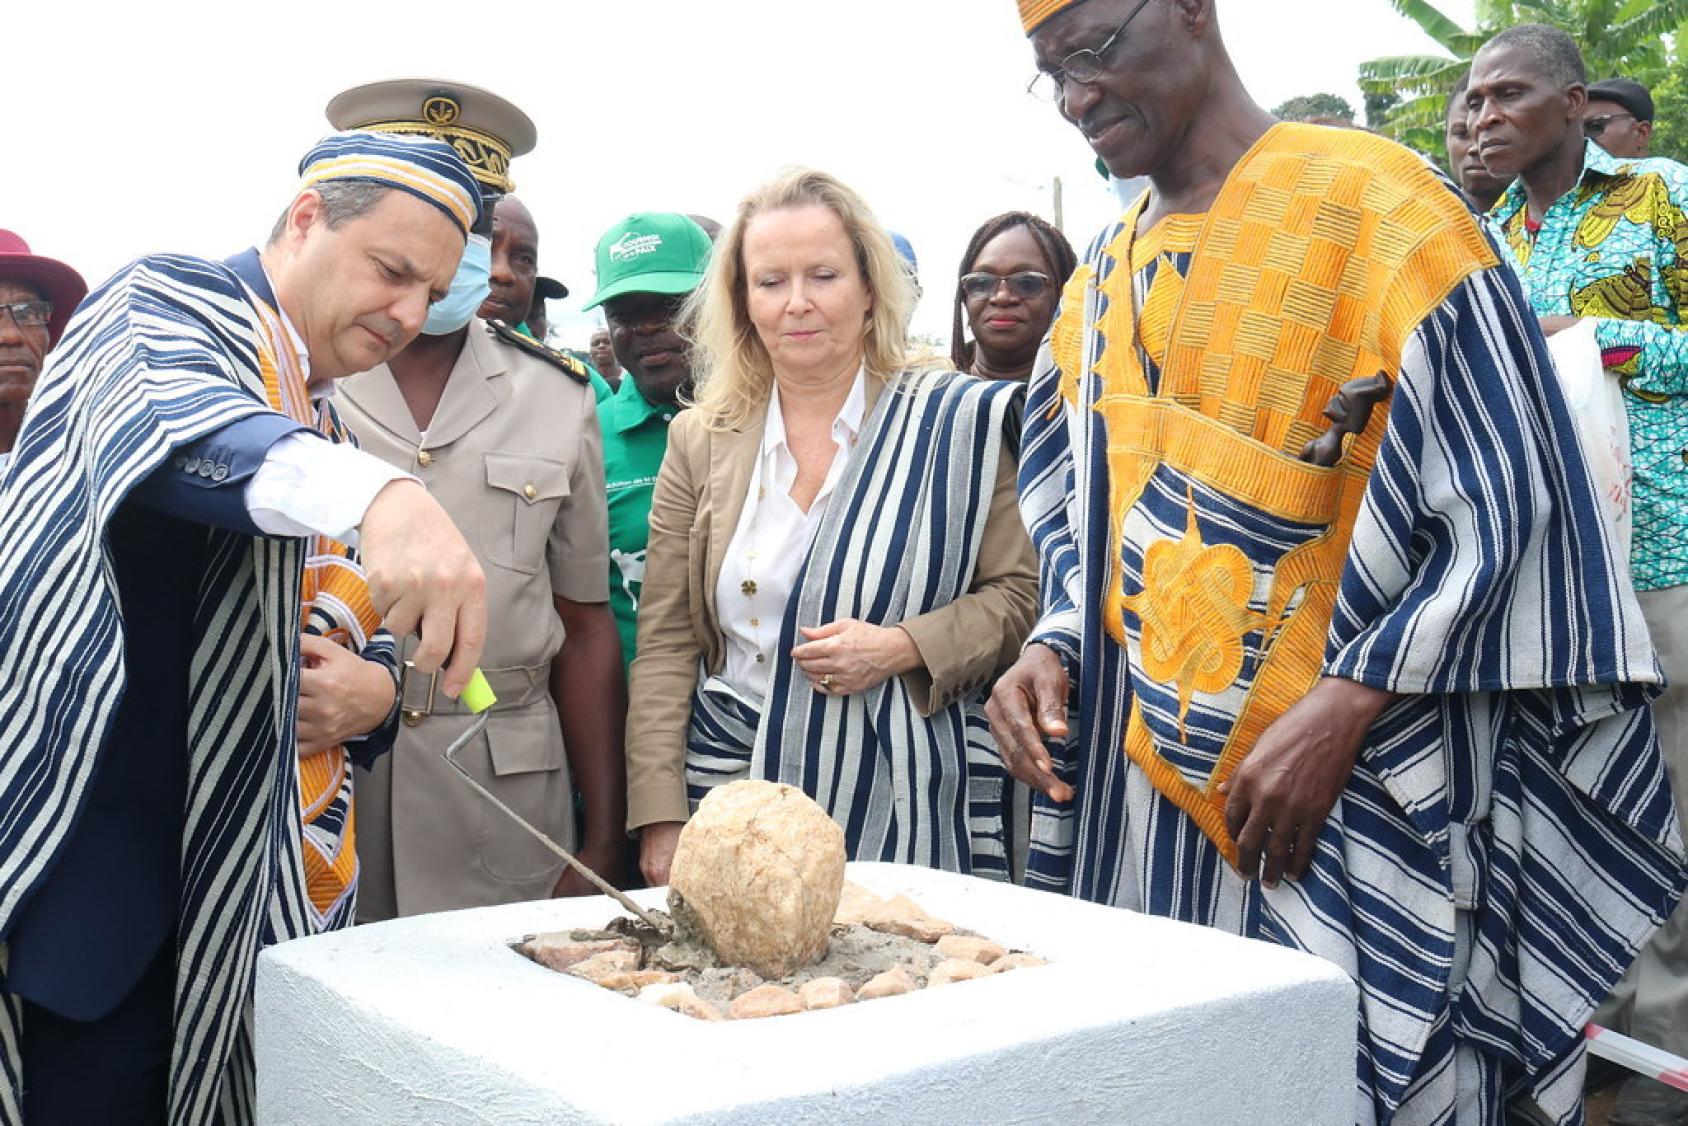 United Nations Resident Coordinator Philippe Poinsot lays the foundation stone for a multifunctional mill. Dressed in a traditional Ivorian outfit, he is standing next to the UNESCO Representative in Côte d'Ivoire and the Chief of the Biankouma canton, also dressed in a traditional outfit.